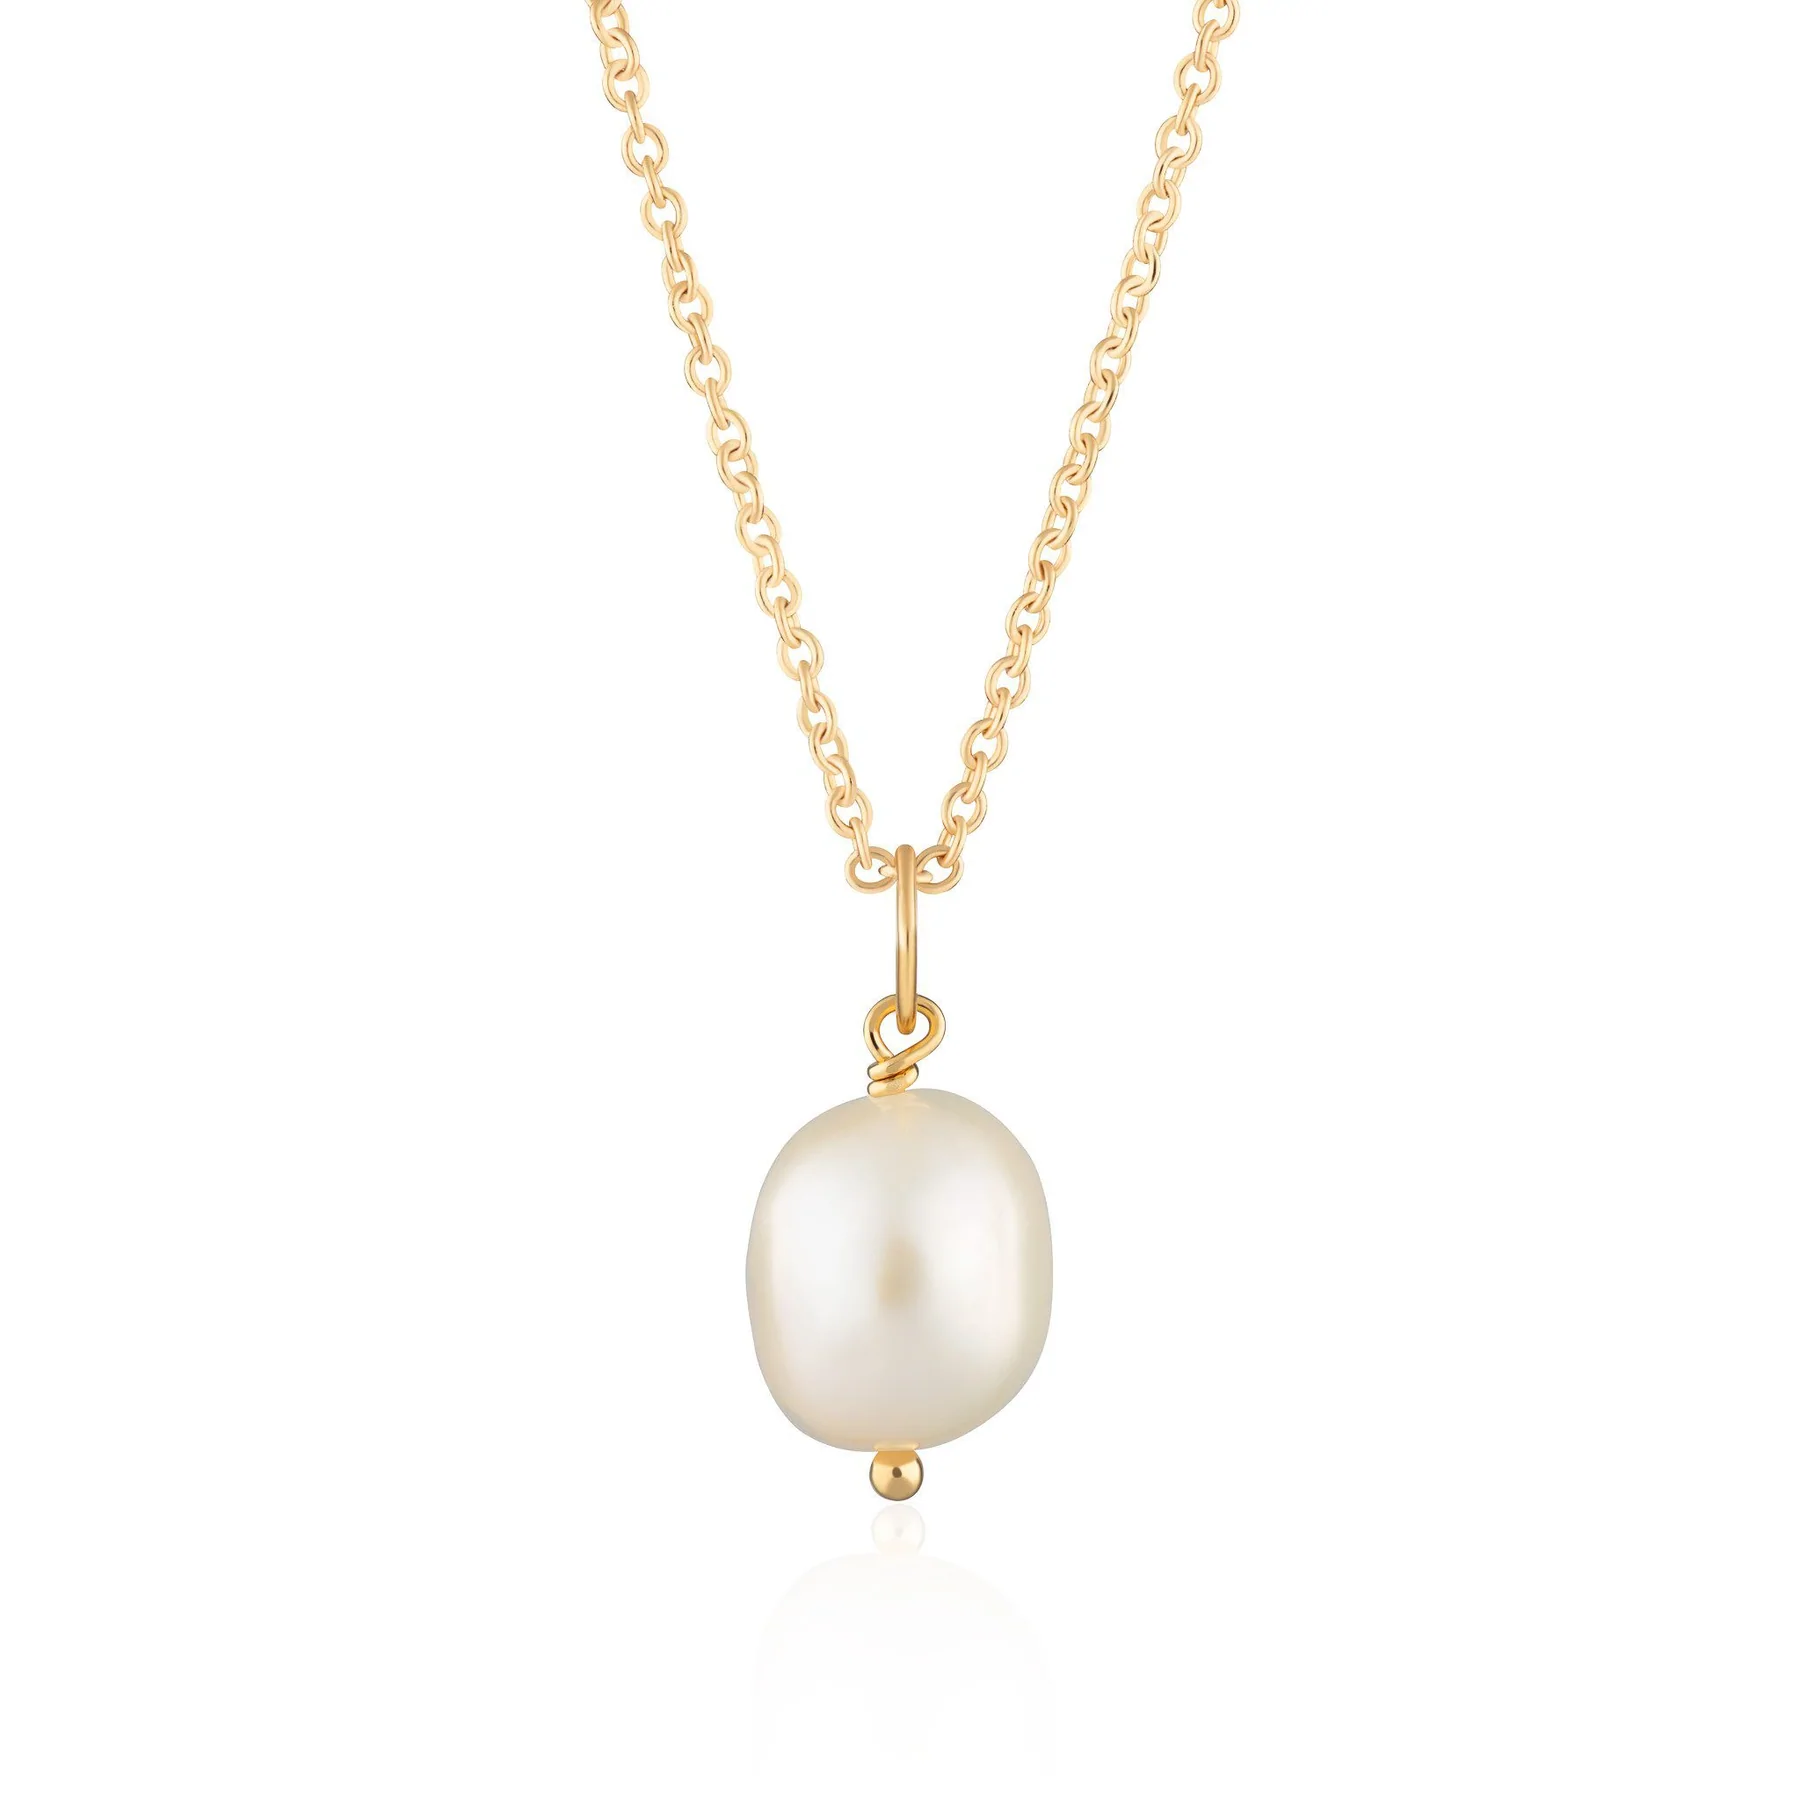 Hannah_Martin_Gold_Plated_Baroque_Pearl_Necklace_with_Slider_Clasp_1800x1800